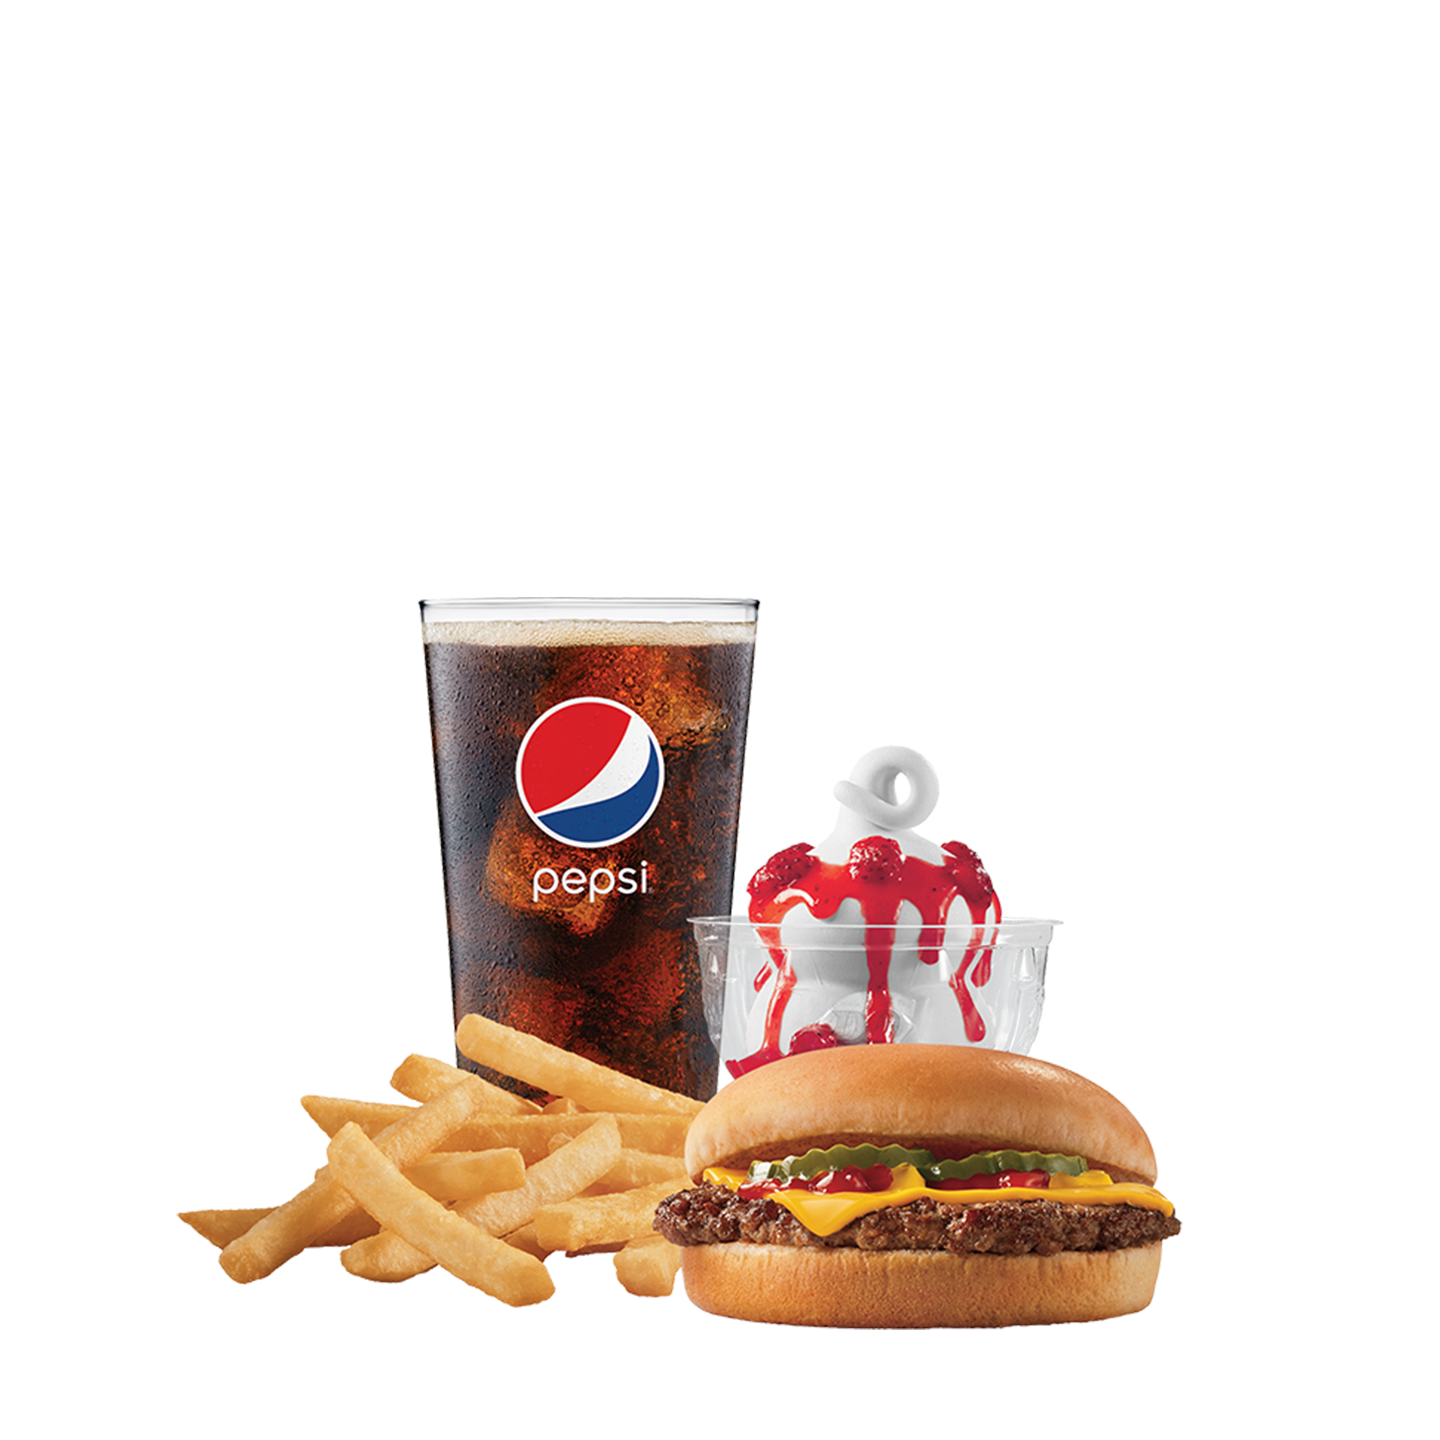 $7 Deluxe Cheeseburger Meal